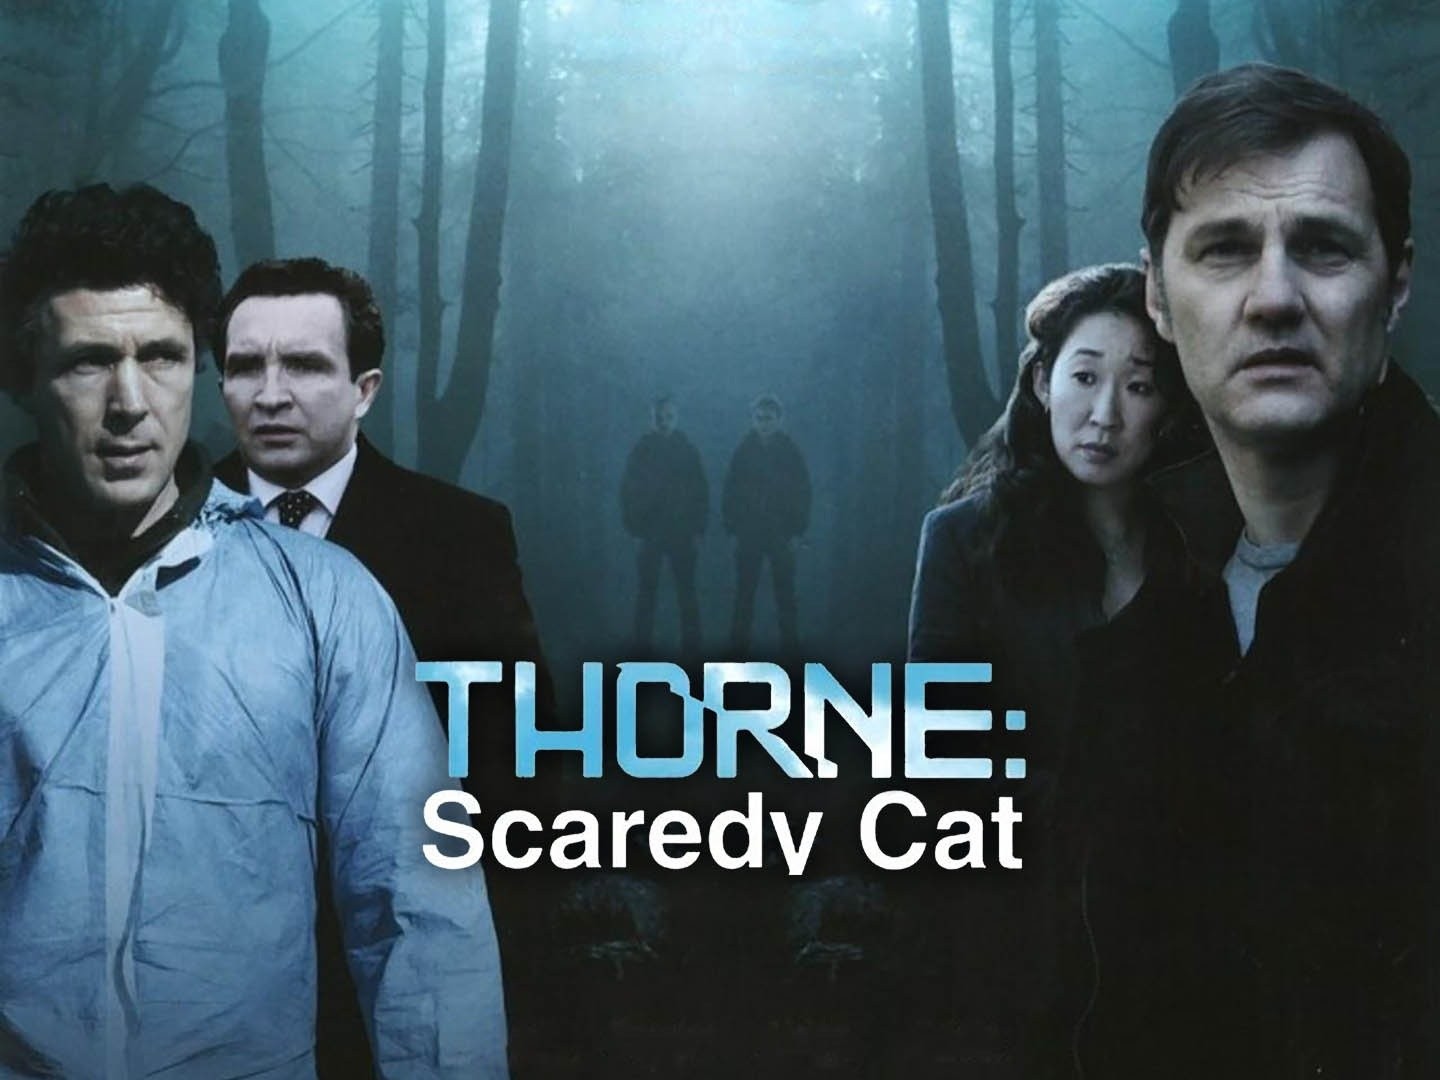 Scaredy Cats - Where to Watch and Stream - TV Guide